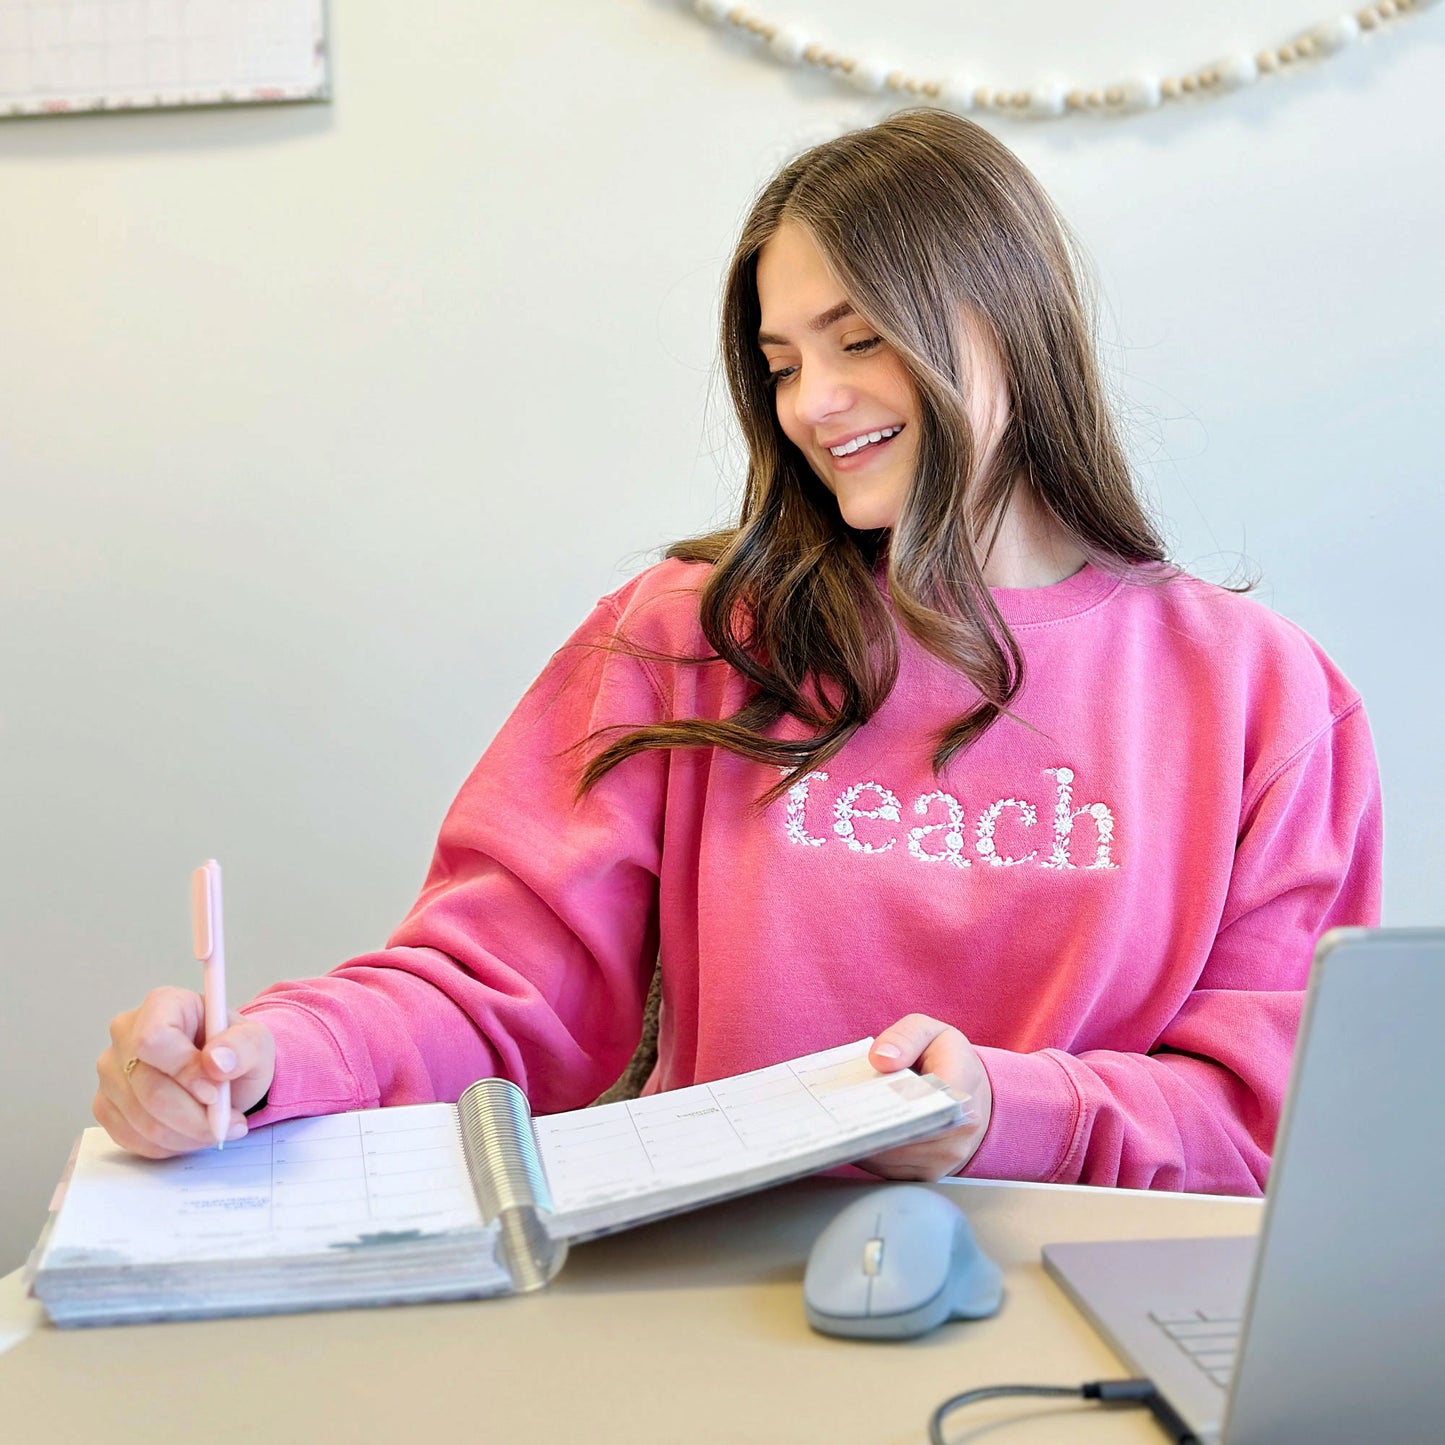 Woman at a desk wearing a pink crewneck sweatshirt with white floral letters teach embroidered across the chest